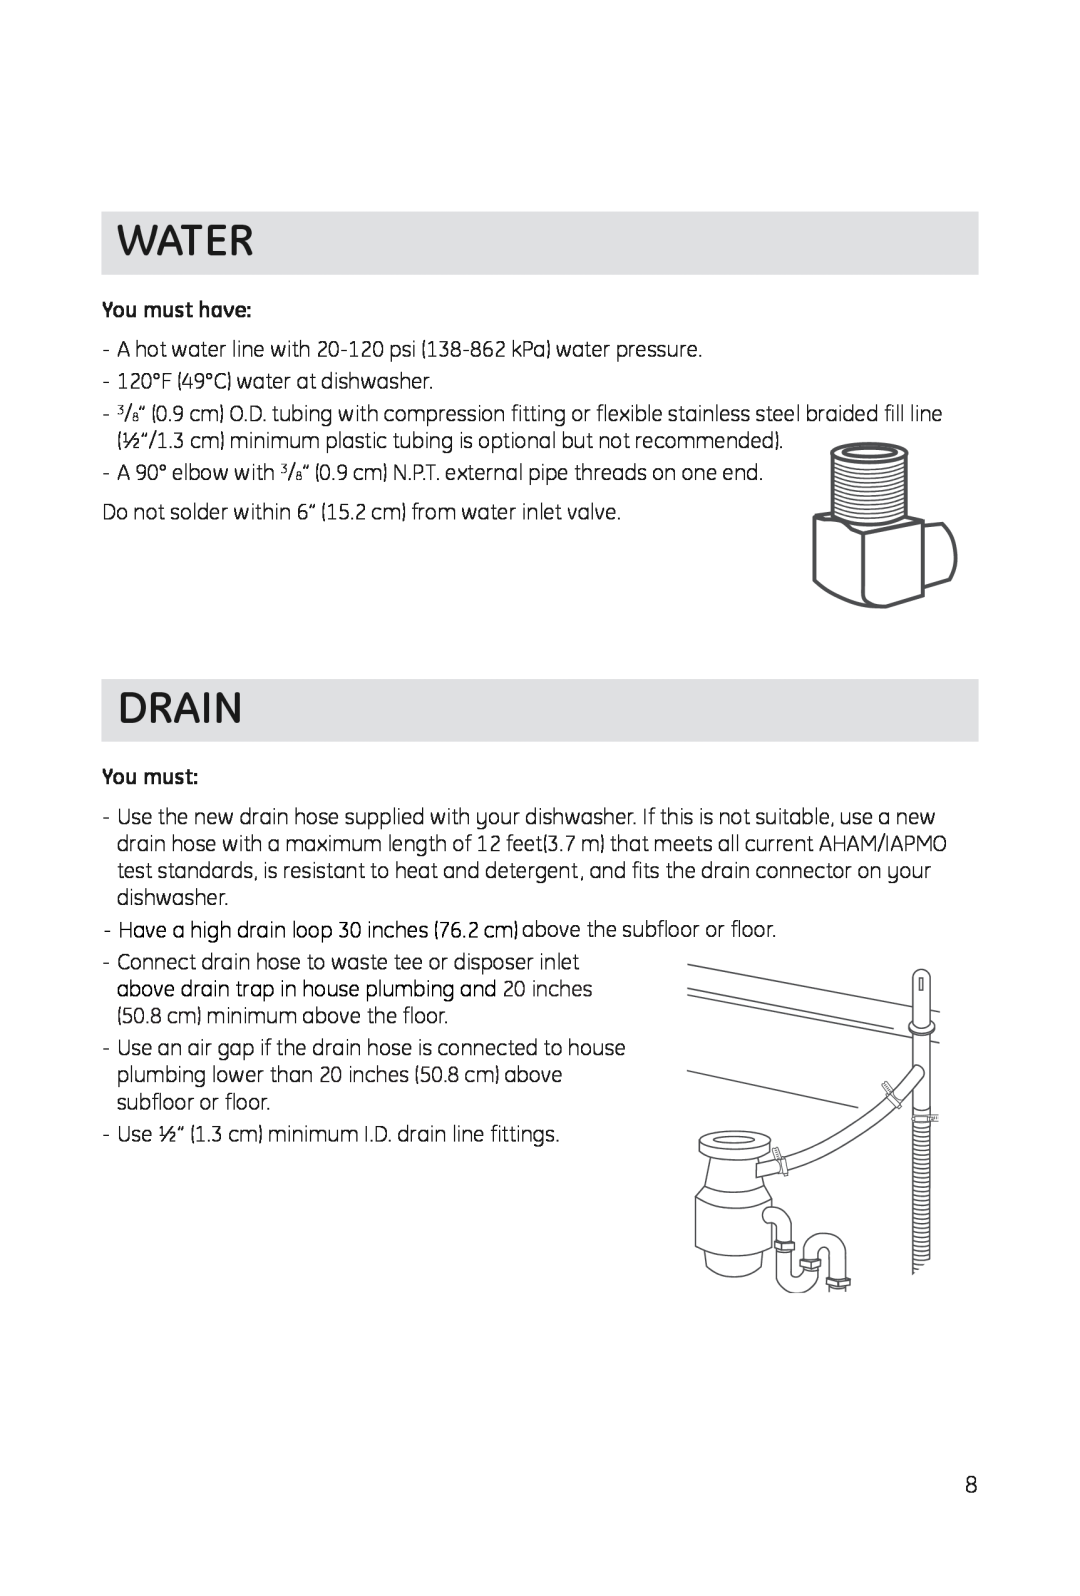 Haier DWL3025 installation manual Water, Drain, You must have 